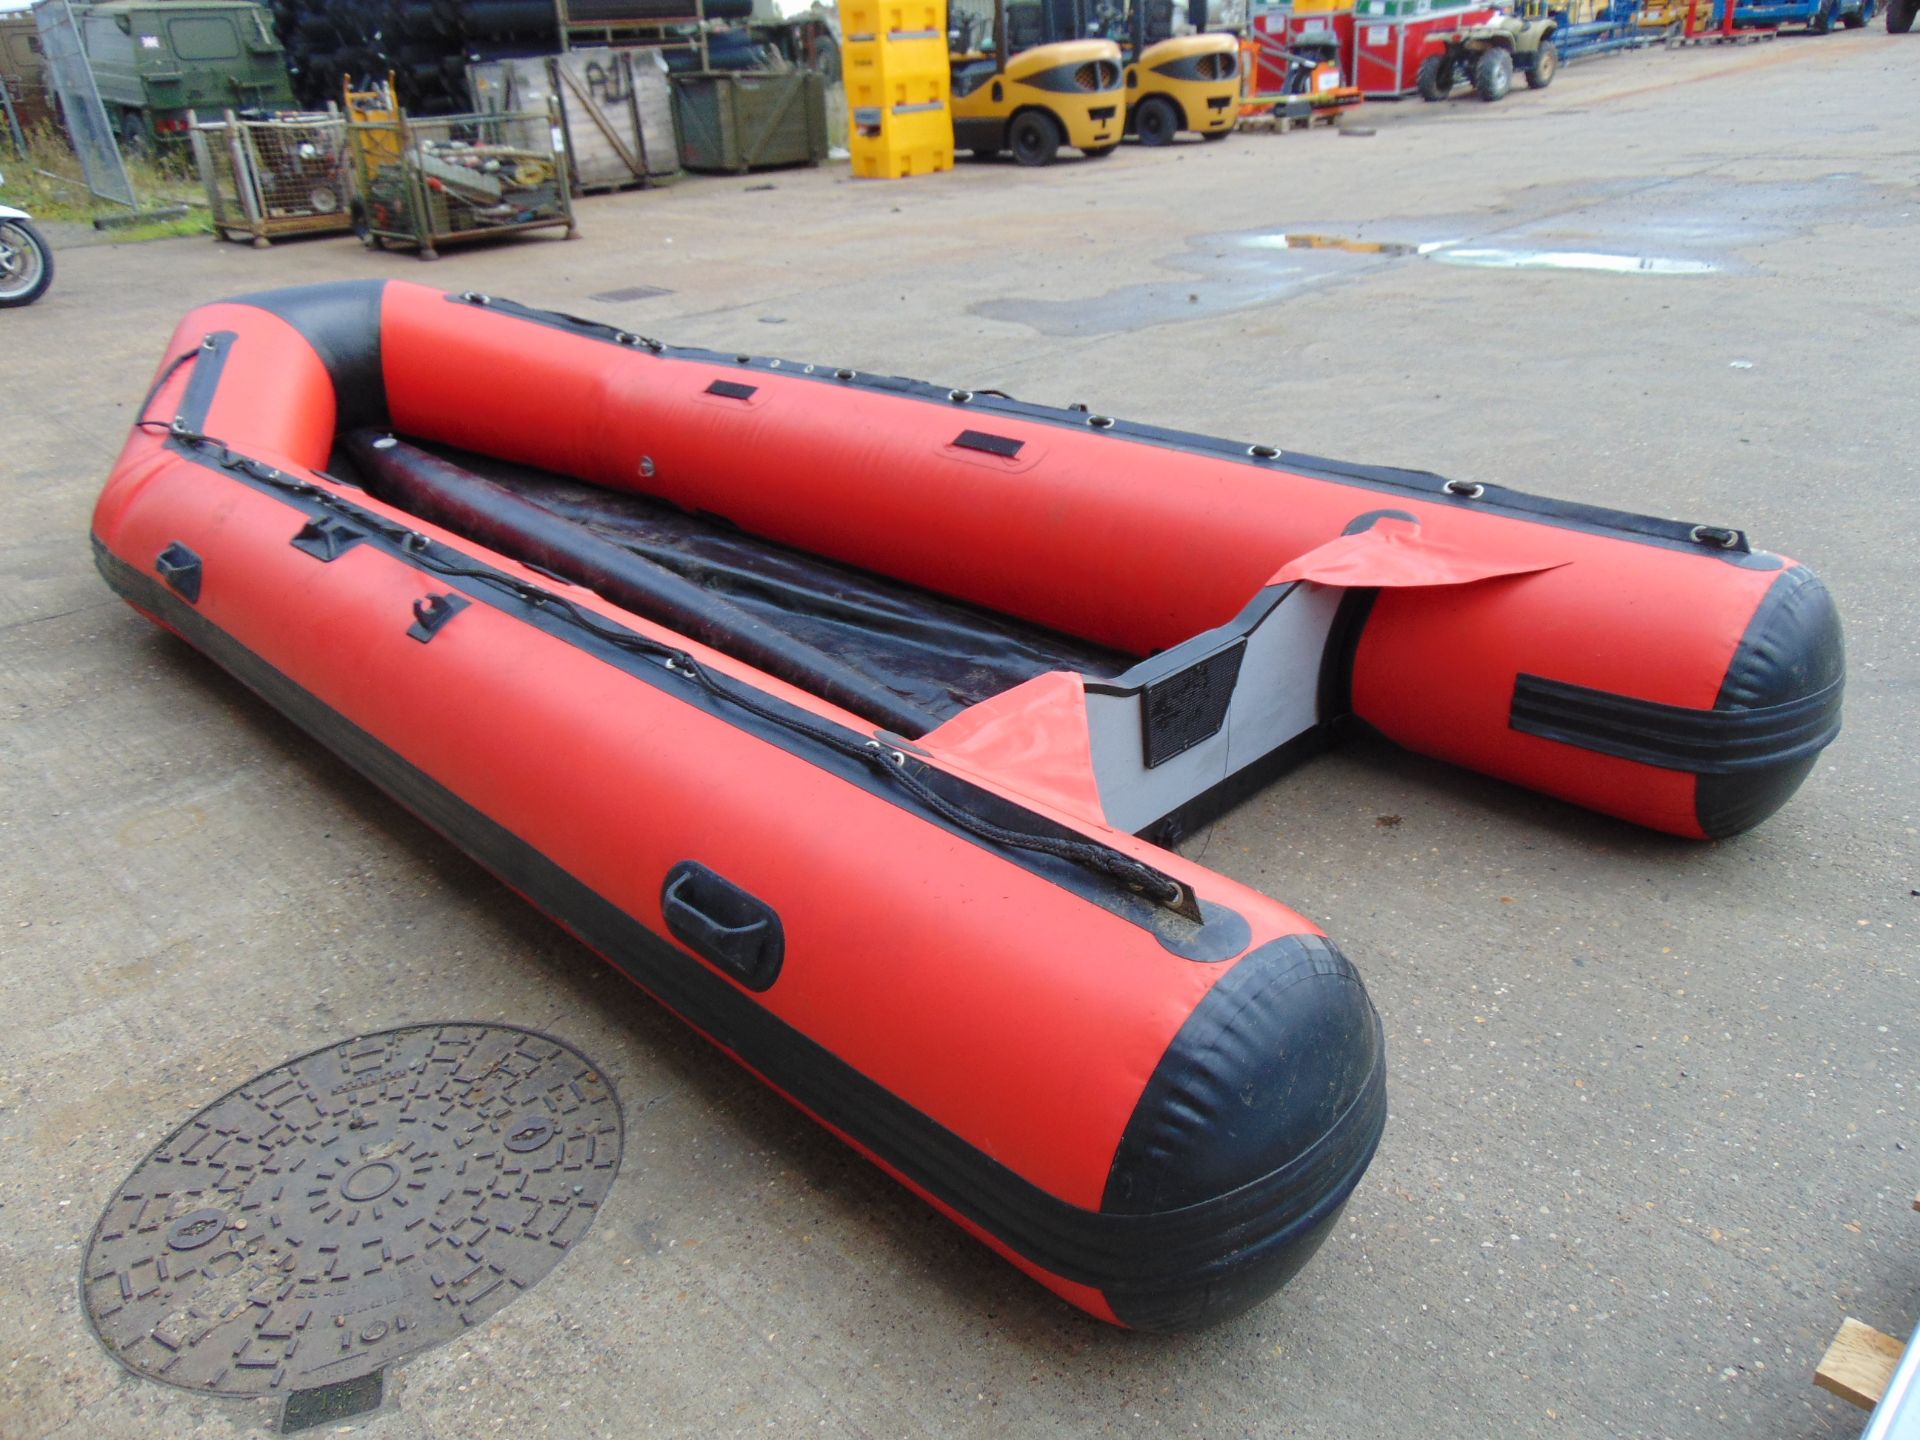 Sinoboat Inflatable Flood Rescue Boat - Image 6 of 14